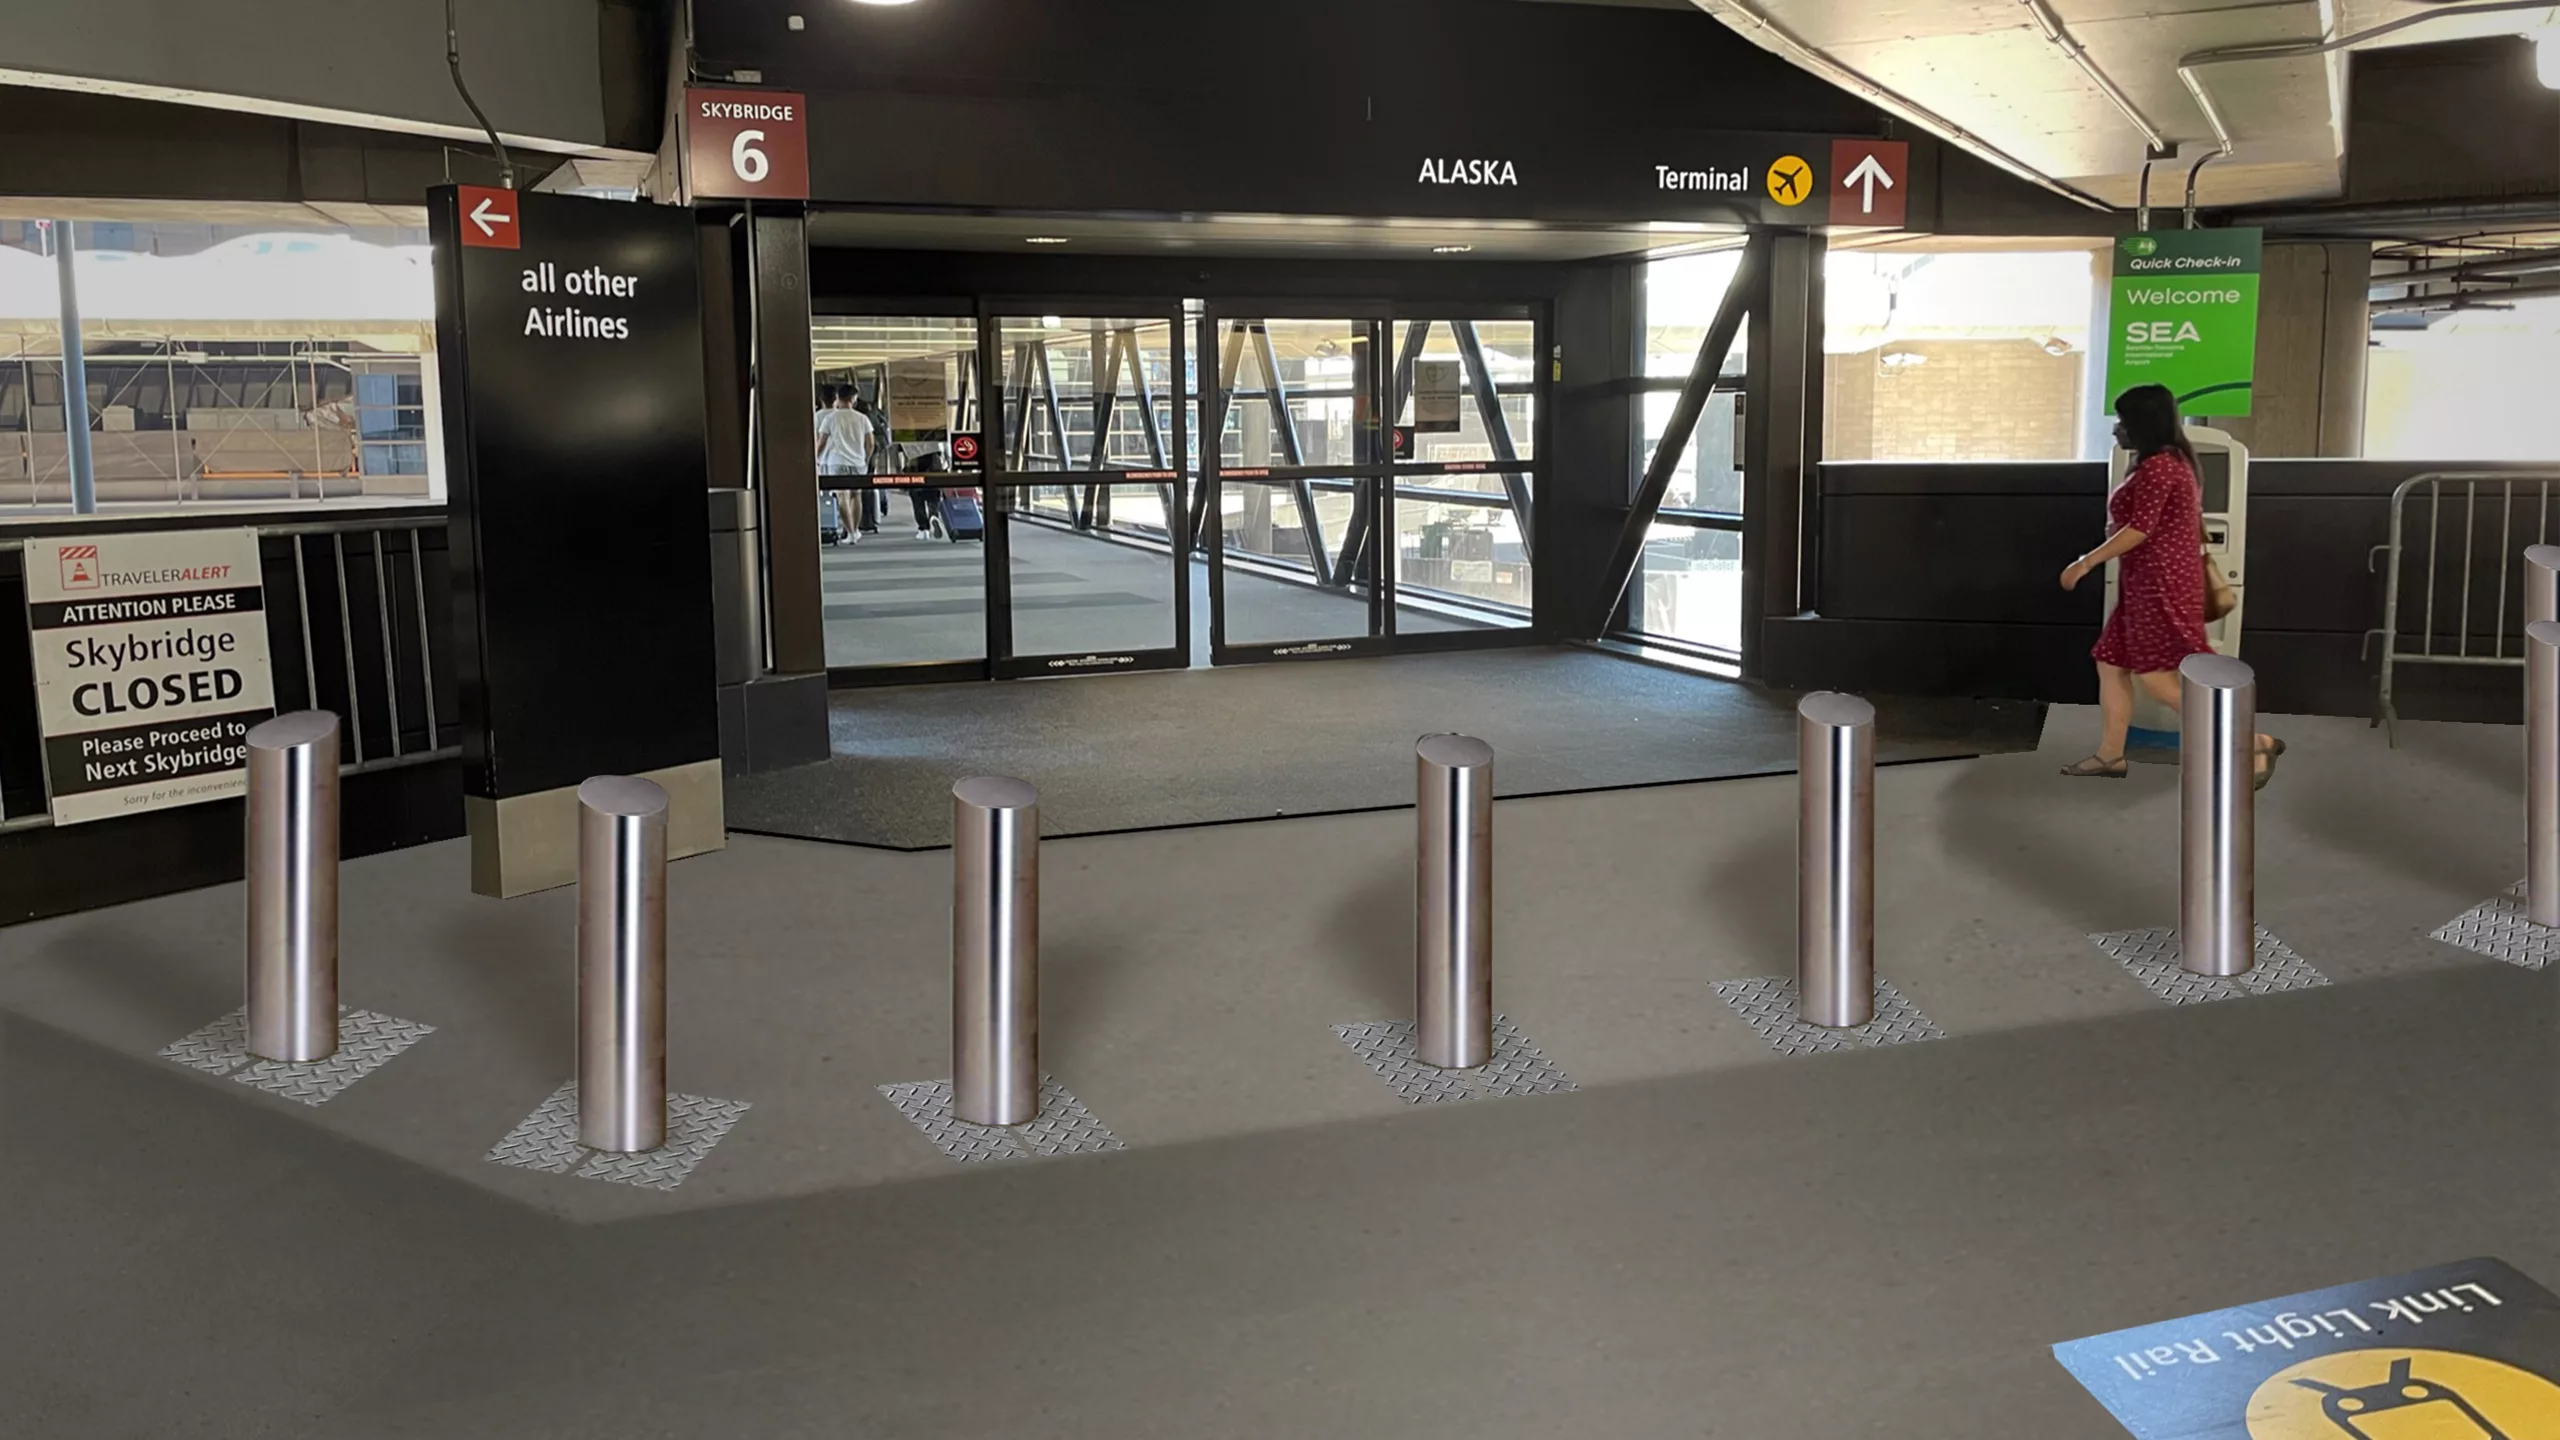 Daylight image of steel bollards in front of the pedestrian skybridge leading to Sea-Tac International Airport's main terminal